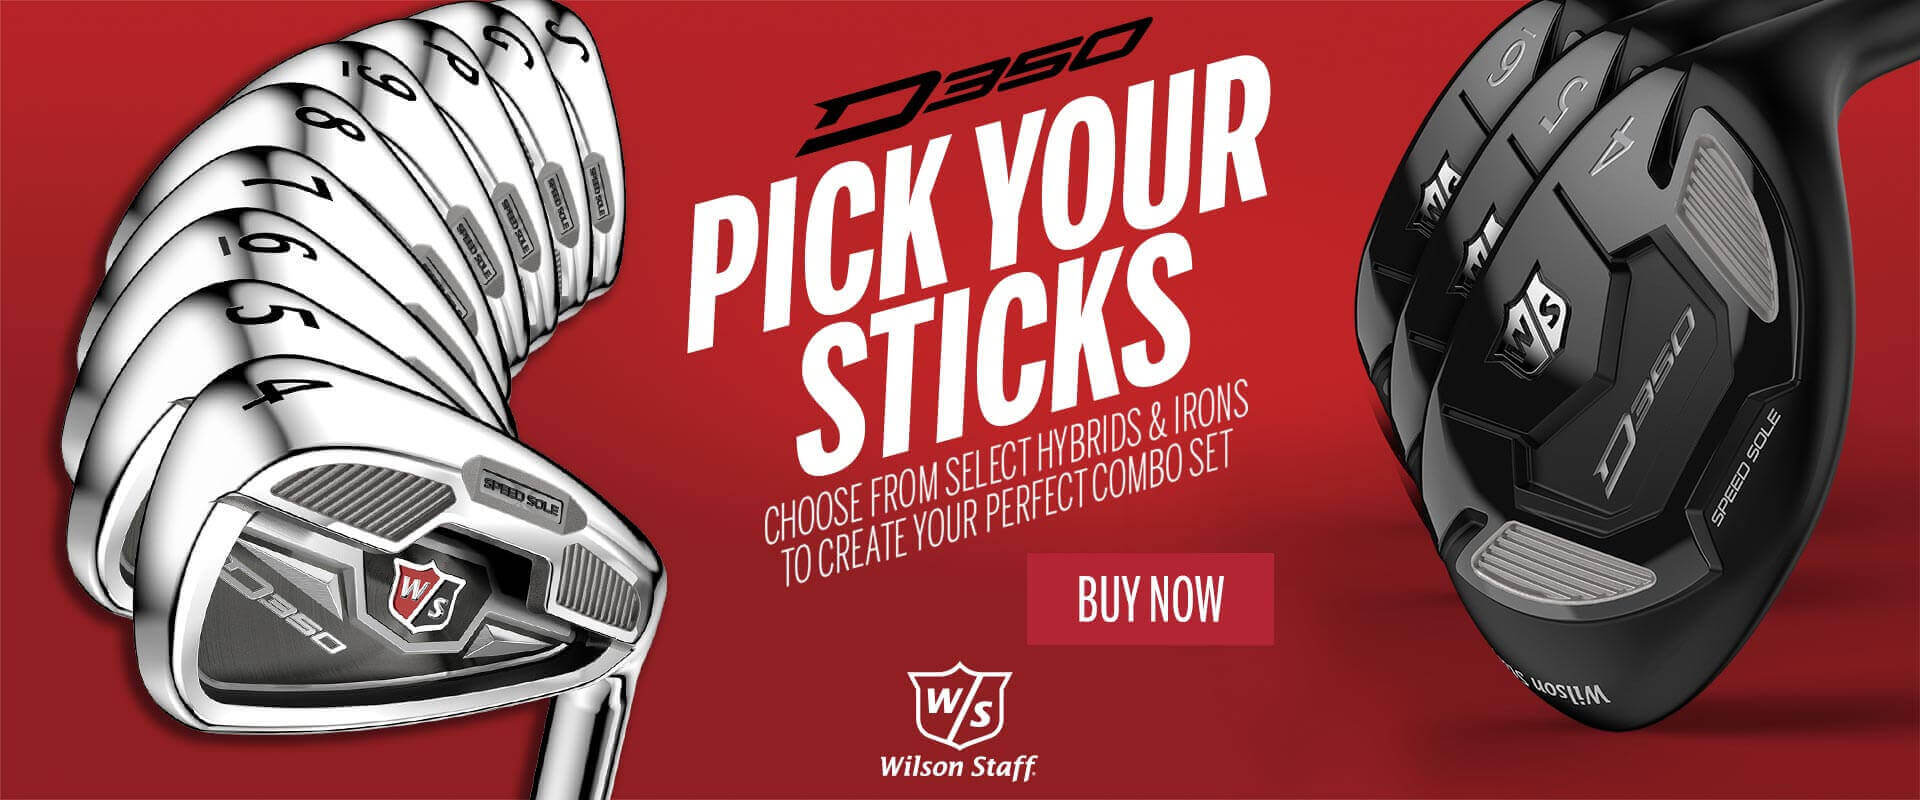 Pick Your Sticks. Choose from select hybrids and irons to create your perfect combo set - D350